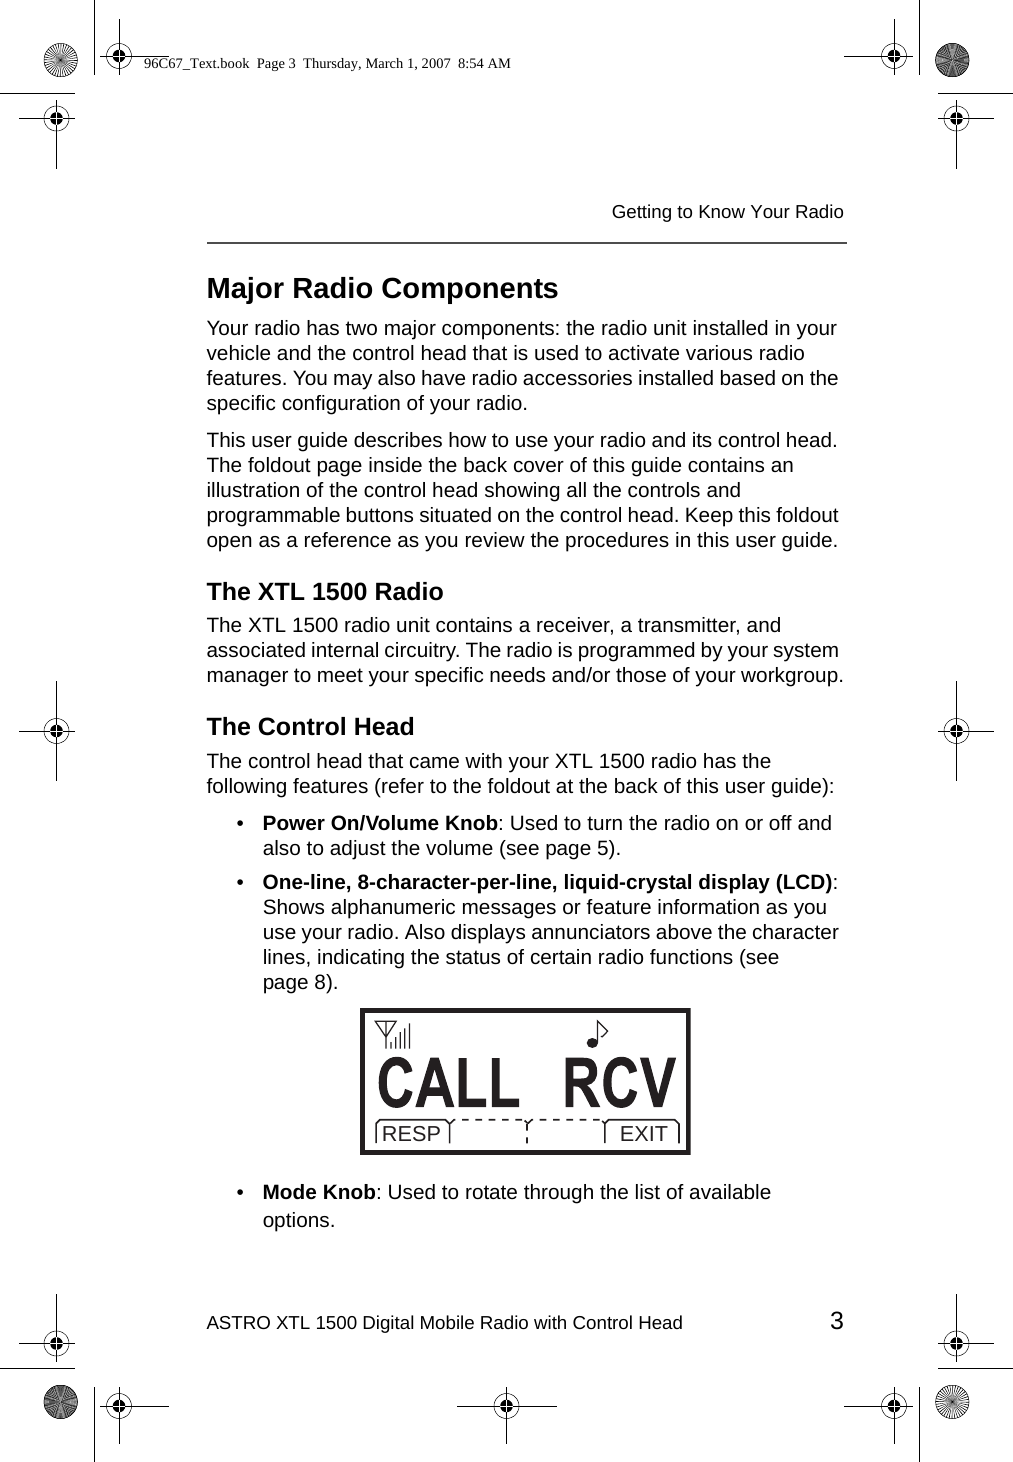 ASTRO XTL 1500 Digital Mobile Radio with Control Head 3Getting to Know Your RadioMajor Radio ComponentsYour radio has two major components: the radio unit installed in your vehicle and the control head that is used to activate various radio features. You may also have radio accessories installed based on the specific configuration of your radio.This user guide describes how to use your radio and its control head. The foldout page inside the back cover of this guide contains an illustration of the control head showing all the controls and programmable buttons situated on the control head. Keep this foldout open as a reference as you review the procedures in this user guide.The XTL 1500 RadioThe XTL 1500 radio unit contains a receiver, a transmitter, and associated internal circuitry. The radio is programmed by your system manager to meet your specific needs and/or those of your workgroup.The Control HeadThe control head that came with your XTL 1500 radio has the following features (refer to the foldout at the back of this user guide):•Power On/Volume Knob: Used to turn the radio on or off and also to adjust the volume (see page 5).•One-line, 8-character-per-line, liquid-crystal display (LCD): Shows alphanumeric messages or feature information as you use your radio. Also displays annunciators above the character lines, indicating the status of certain radio functions (see page 8).•Mode Knob: Used to rotate through the list of available options.RESP EXIT96C67_Text.book  Page 3  Thursday, March 1, 2007  8:54 AM